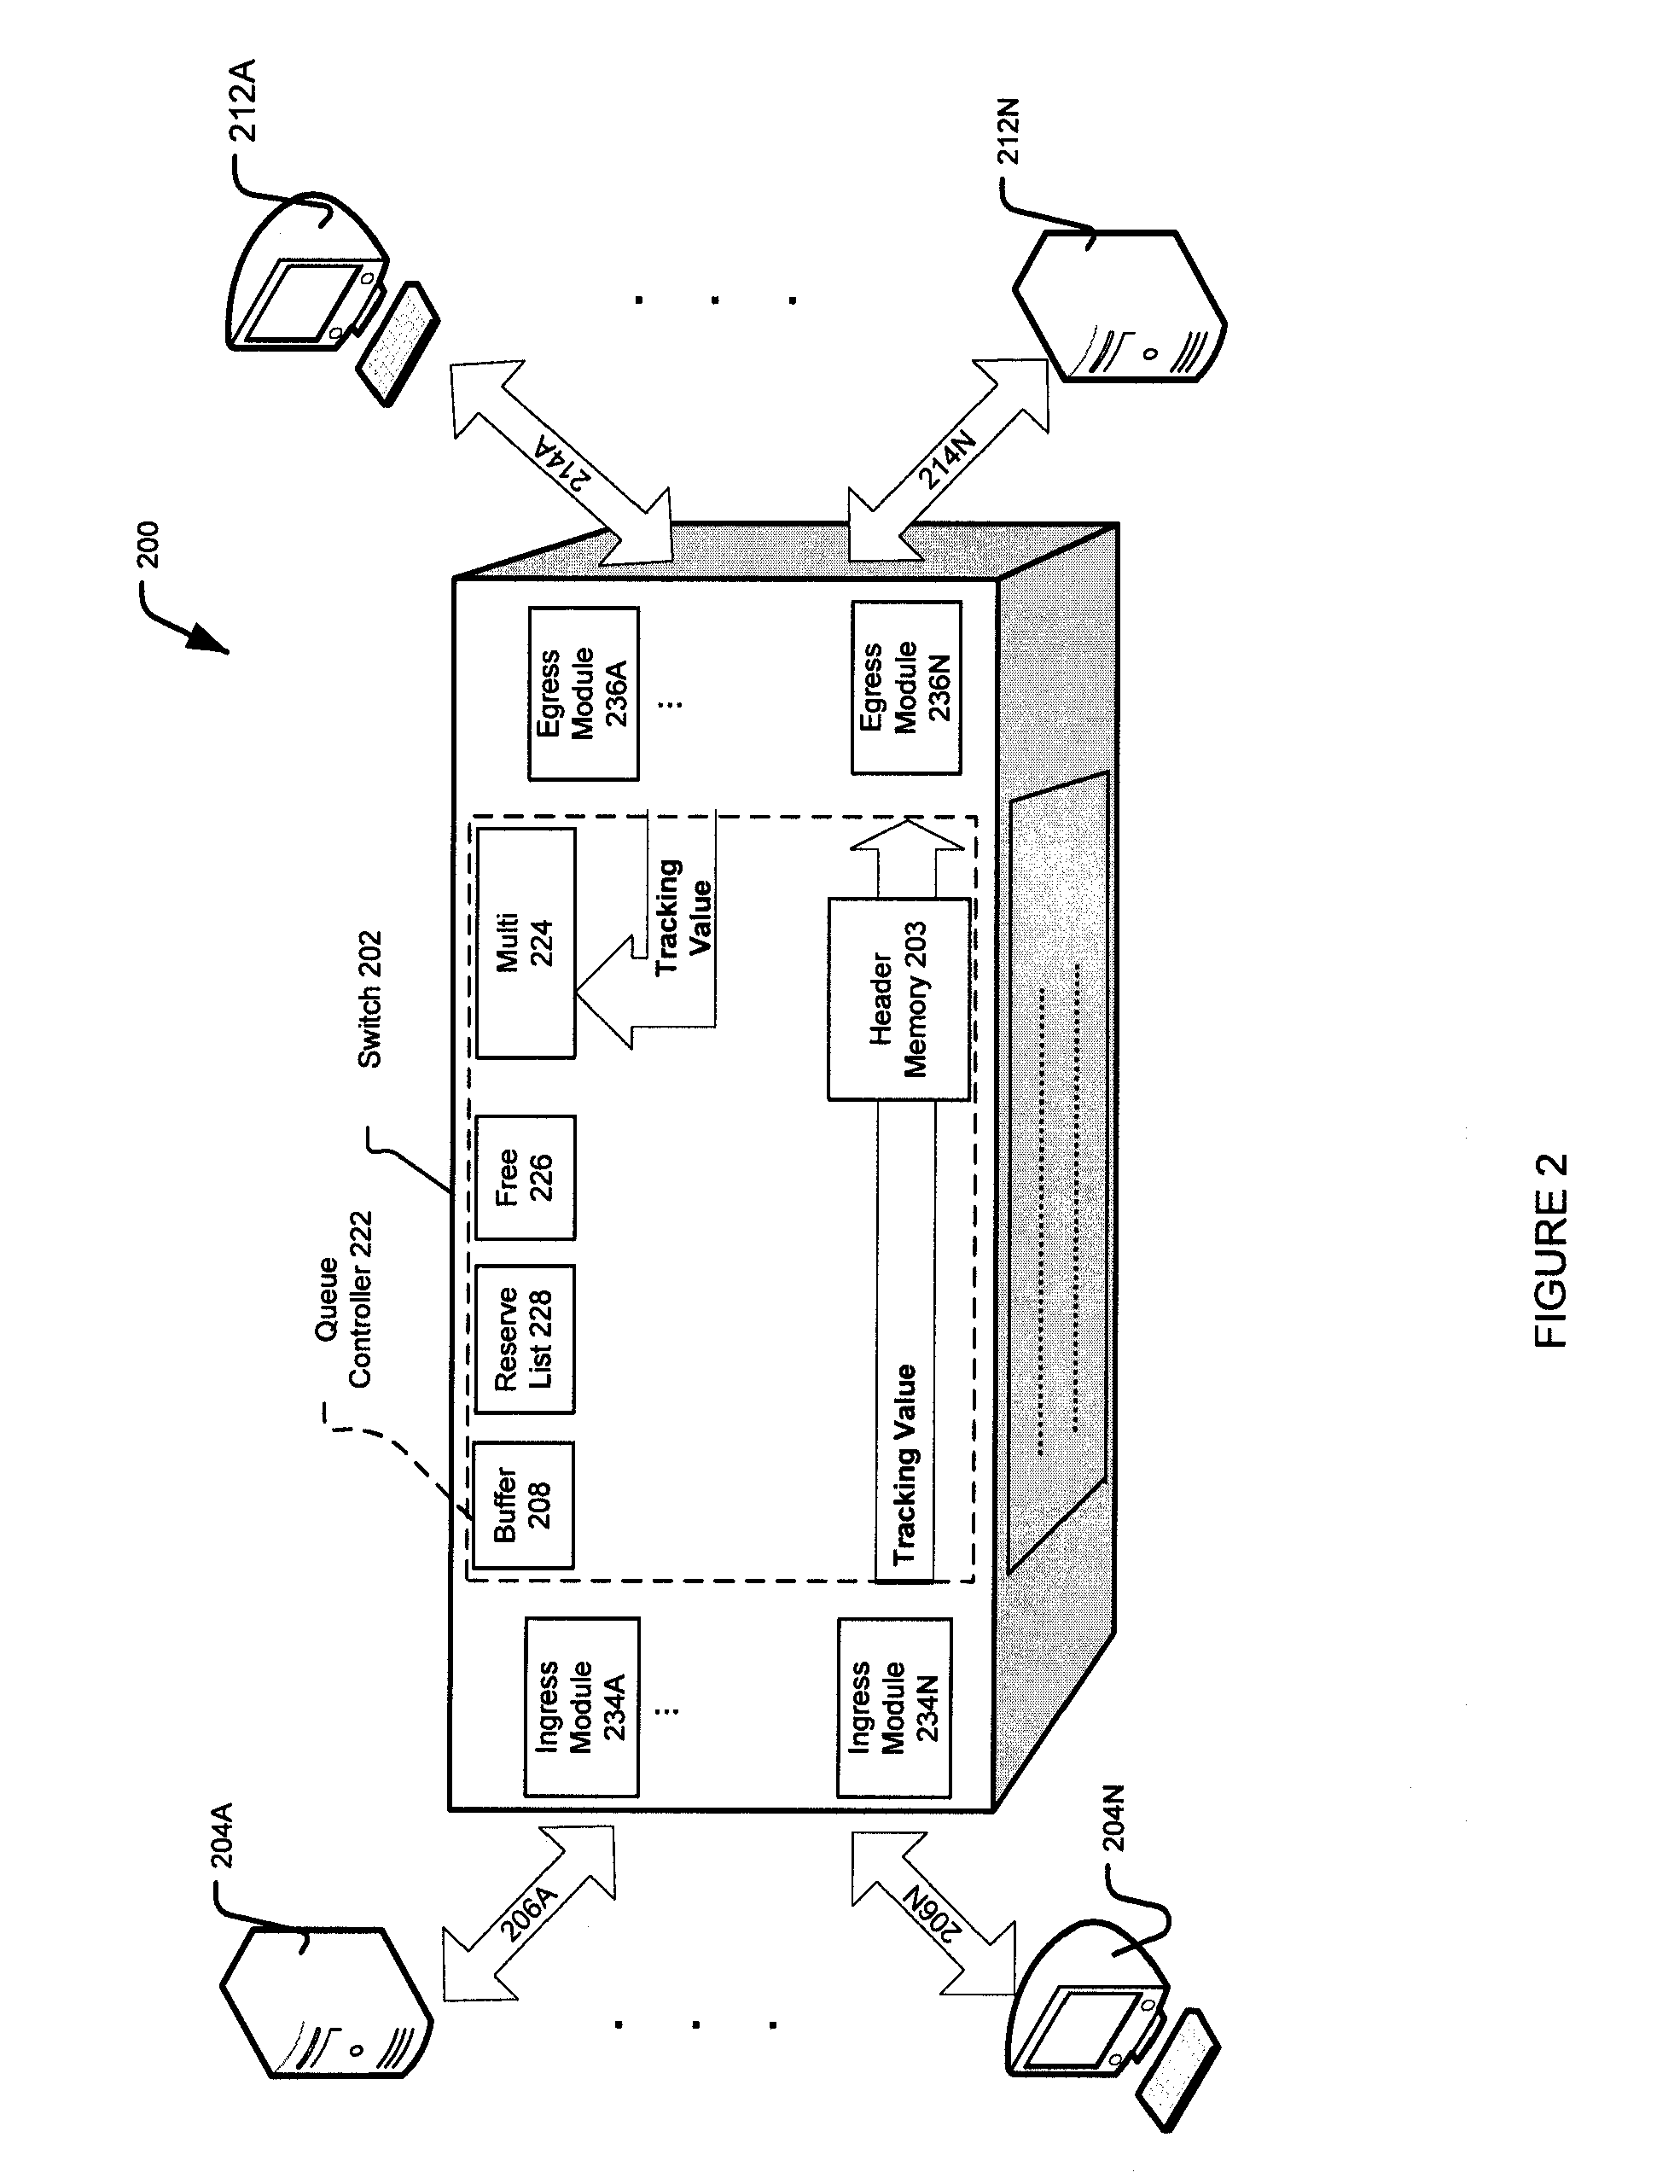 Device and process for efficient multicasting